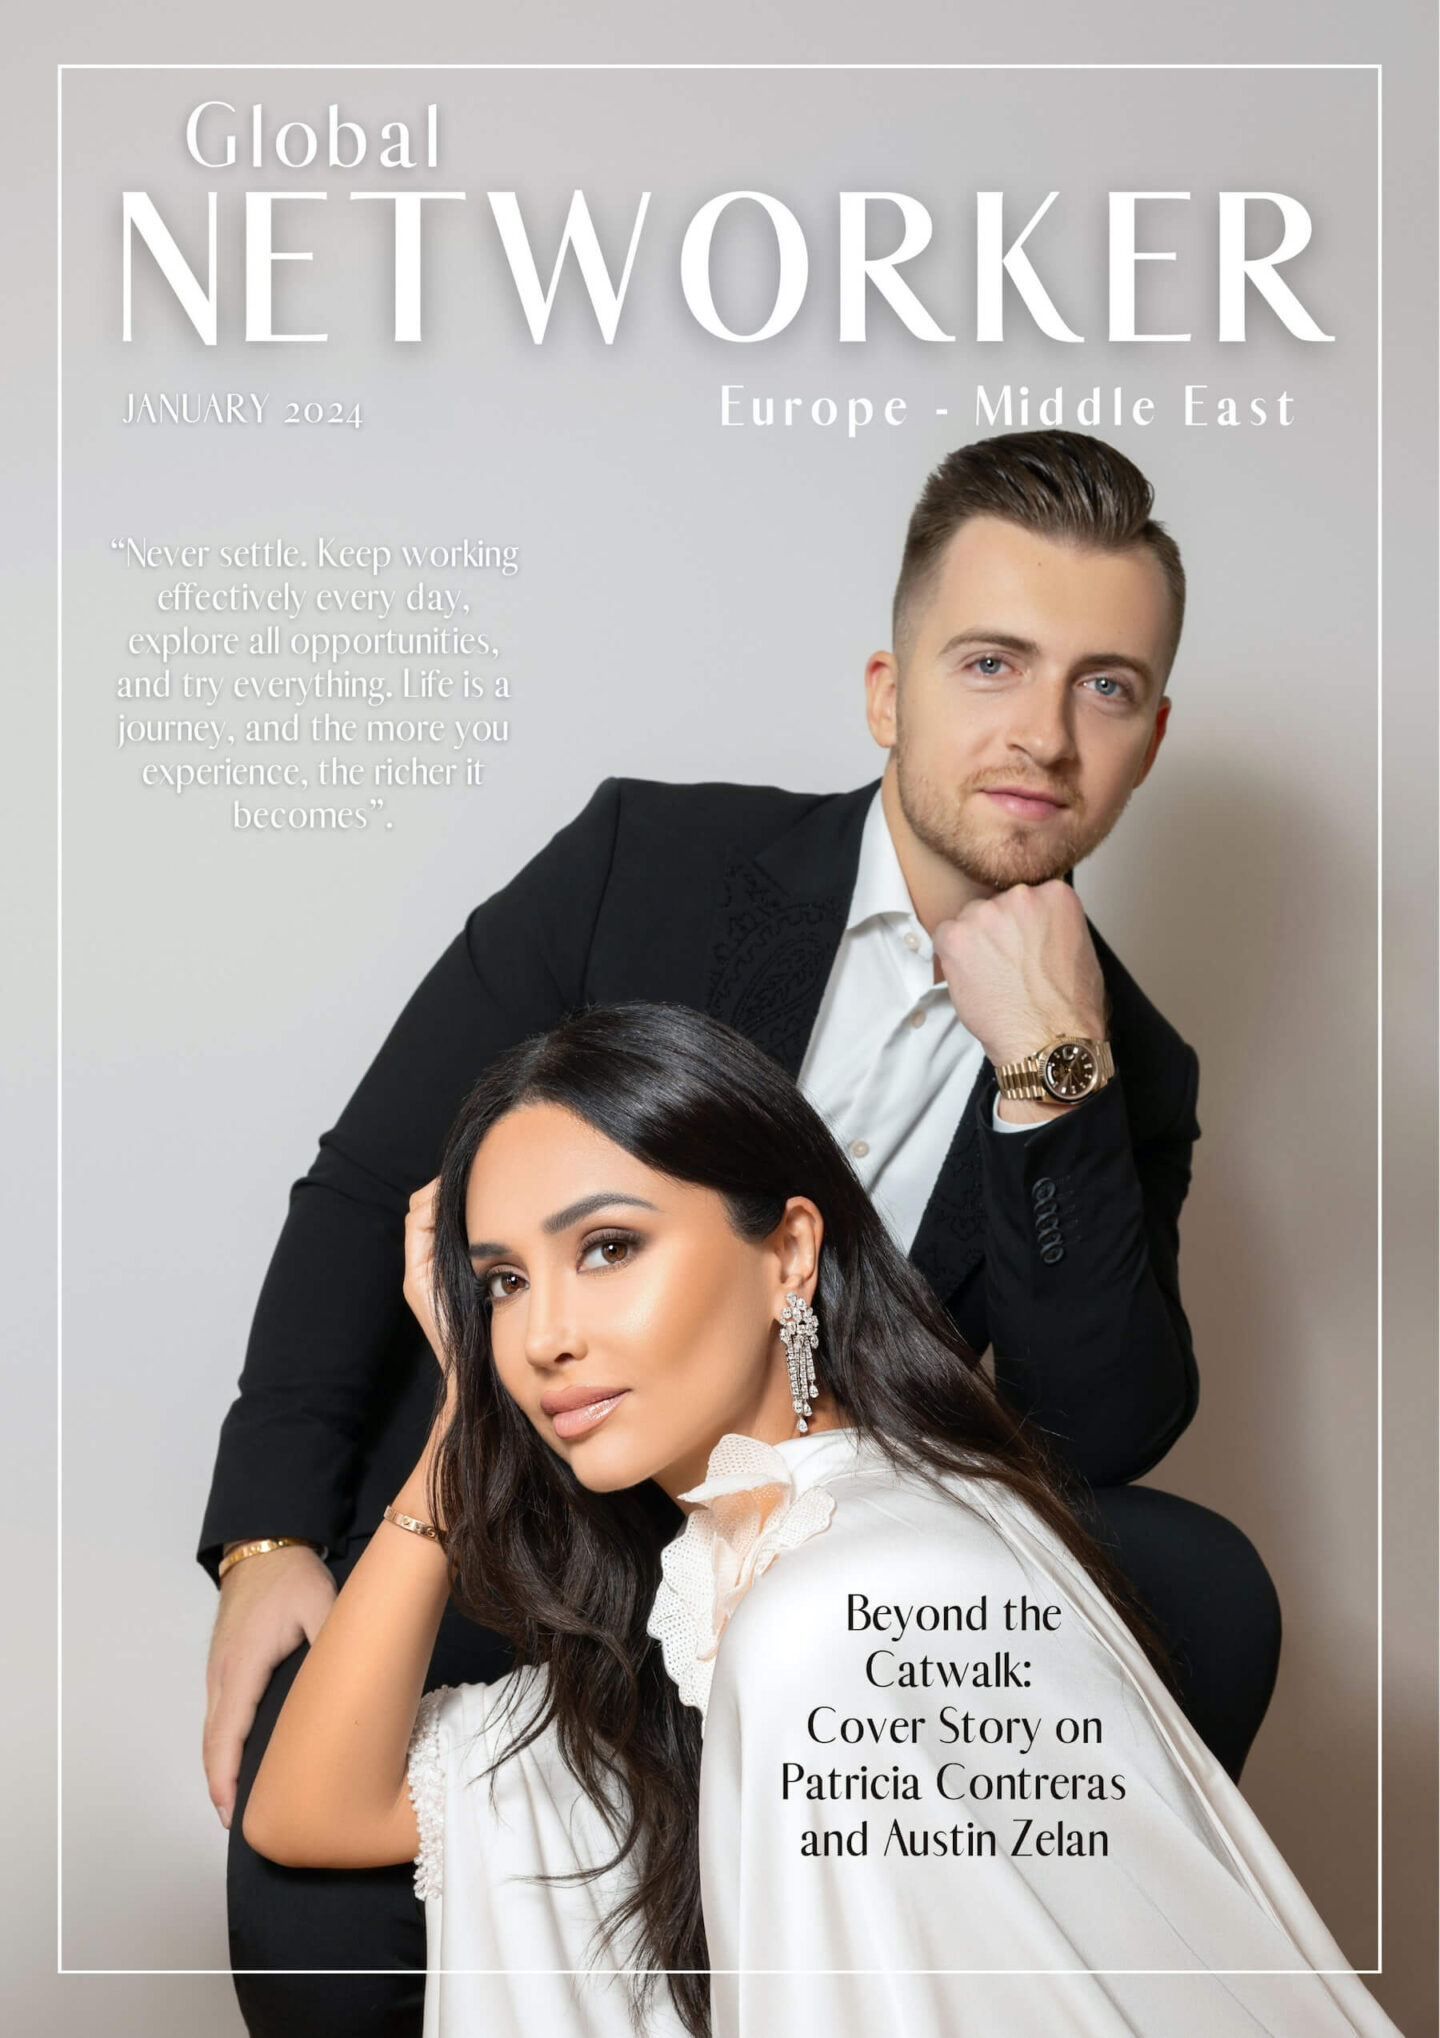 ON THE COVER: PATRICIA CONTRERAS AND AUSTIN ZELAN